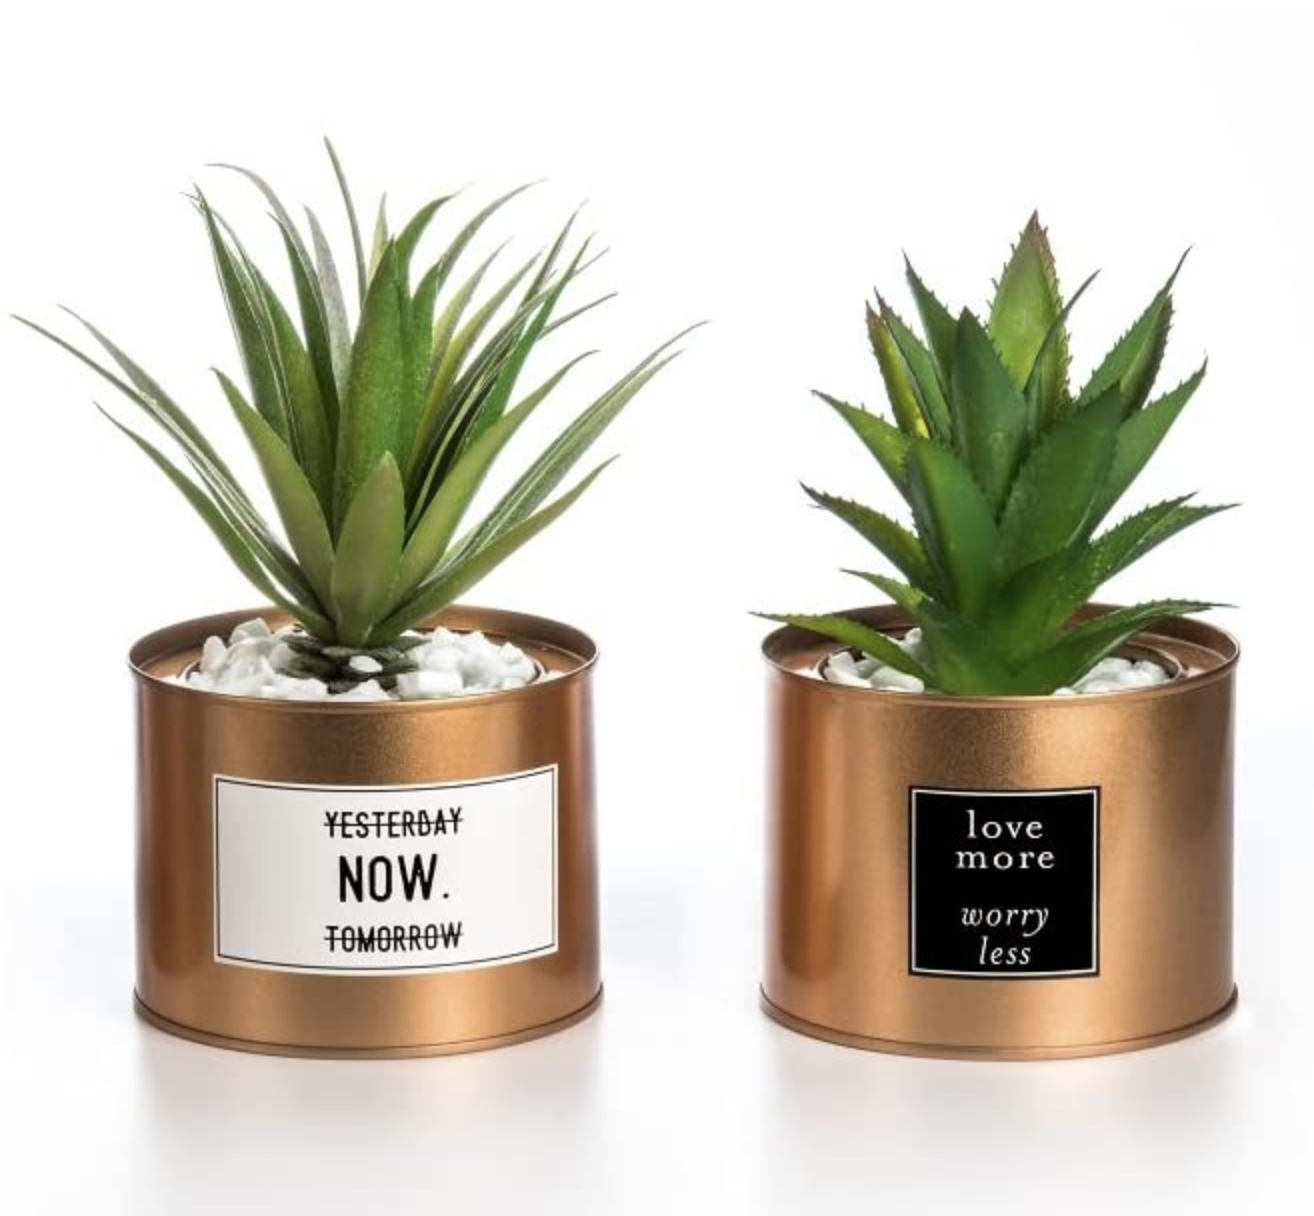 Home office essentials - plant